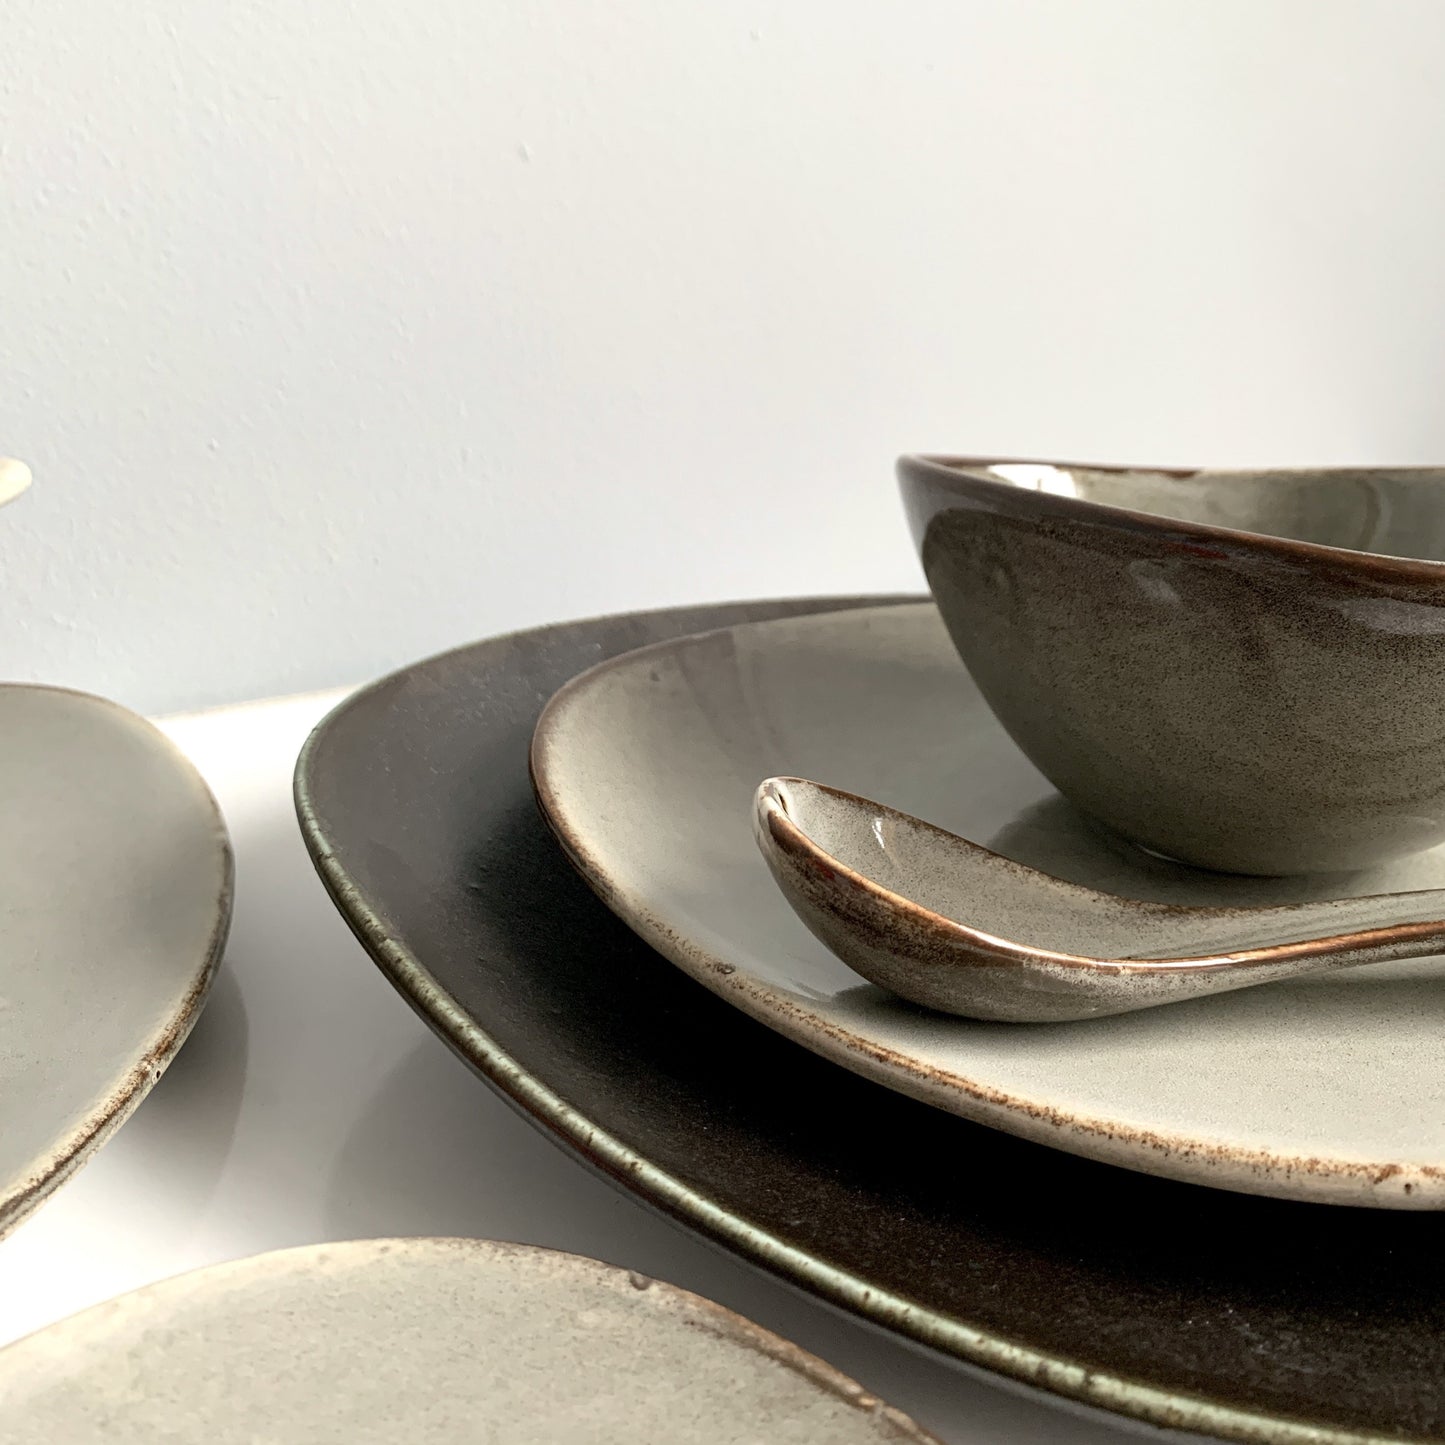 unique asymmetrical dinnerware set - serving and sharing plate set in grey and black